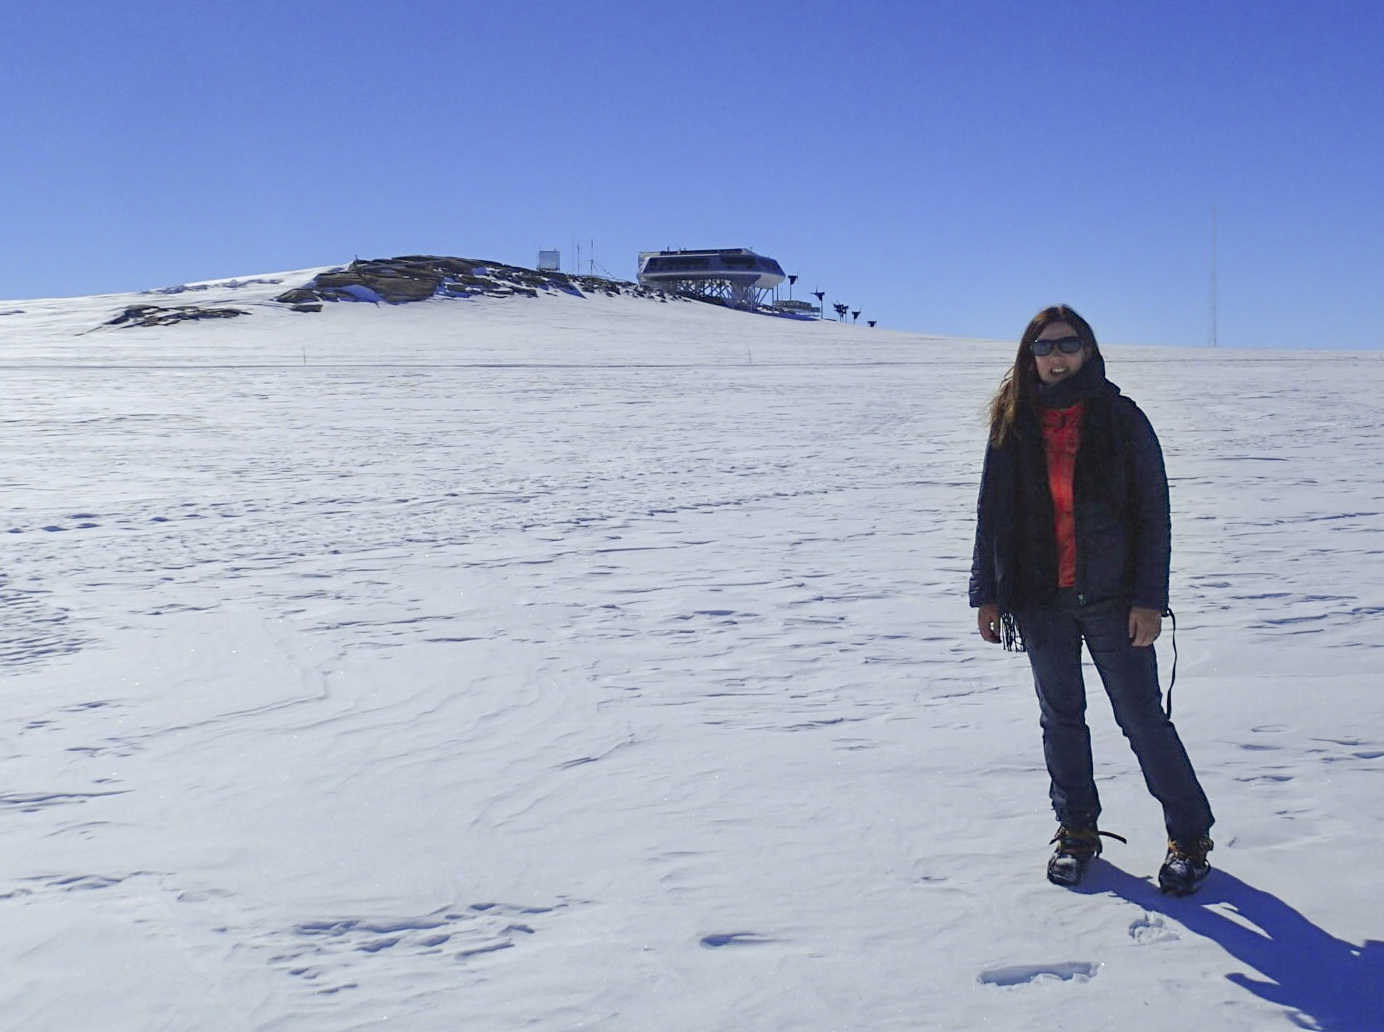 Dr Kate Winter at the Princess Elisabeth Antarctica research station